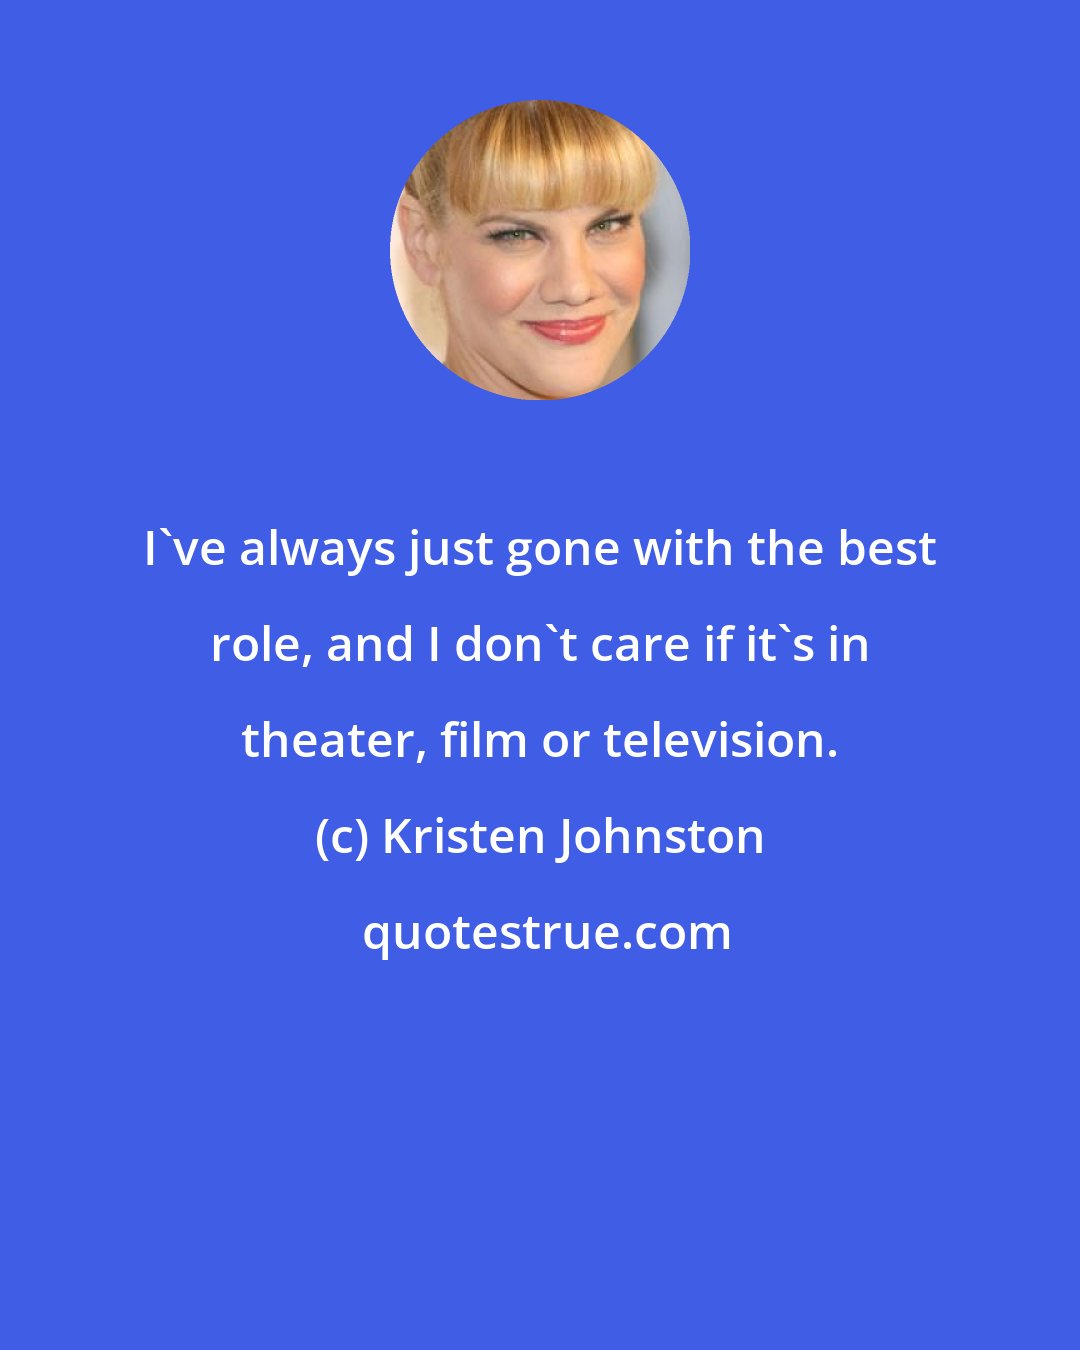 Kristen Johnston: I've always just gone with the best role, and I don't care if it's in theater, film or television.